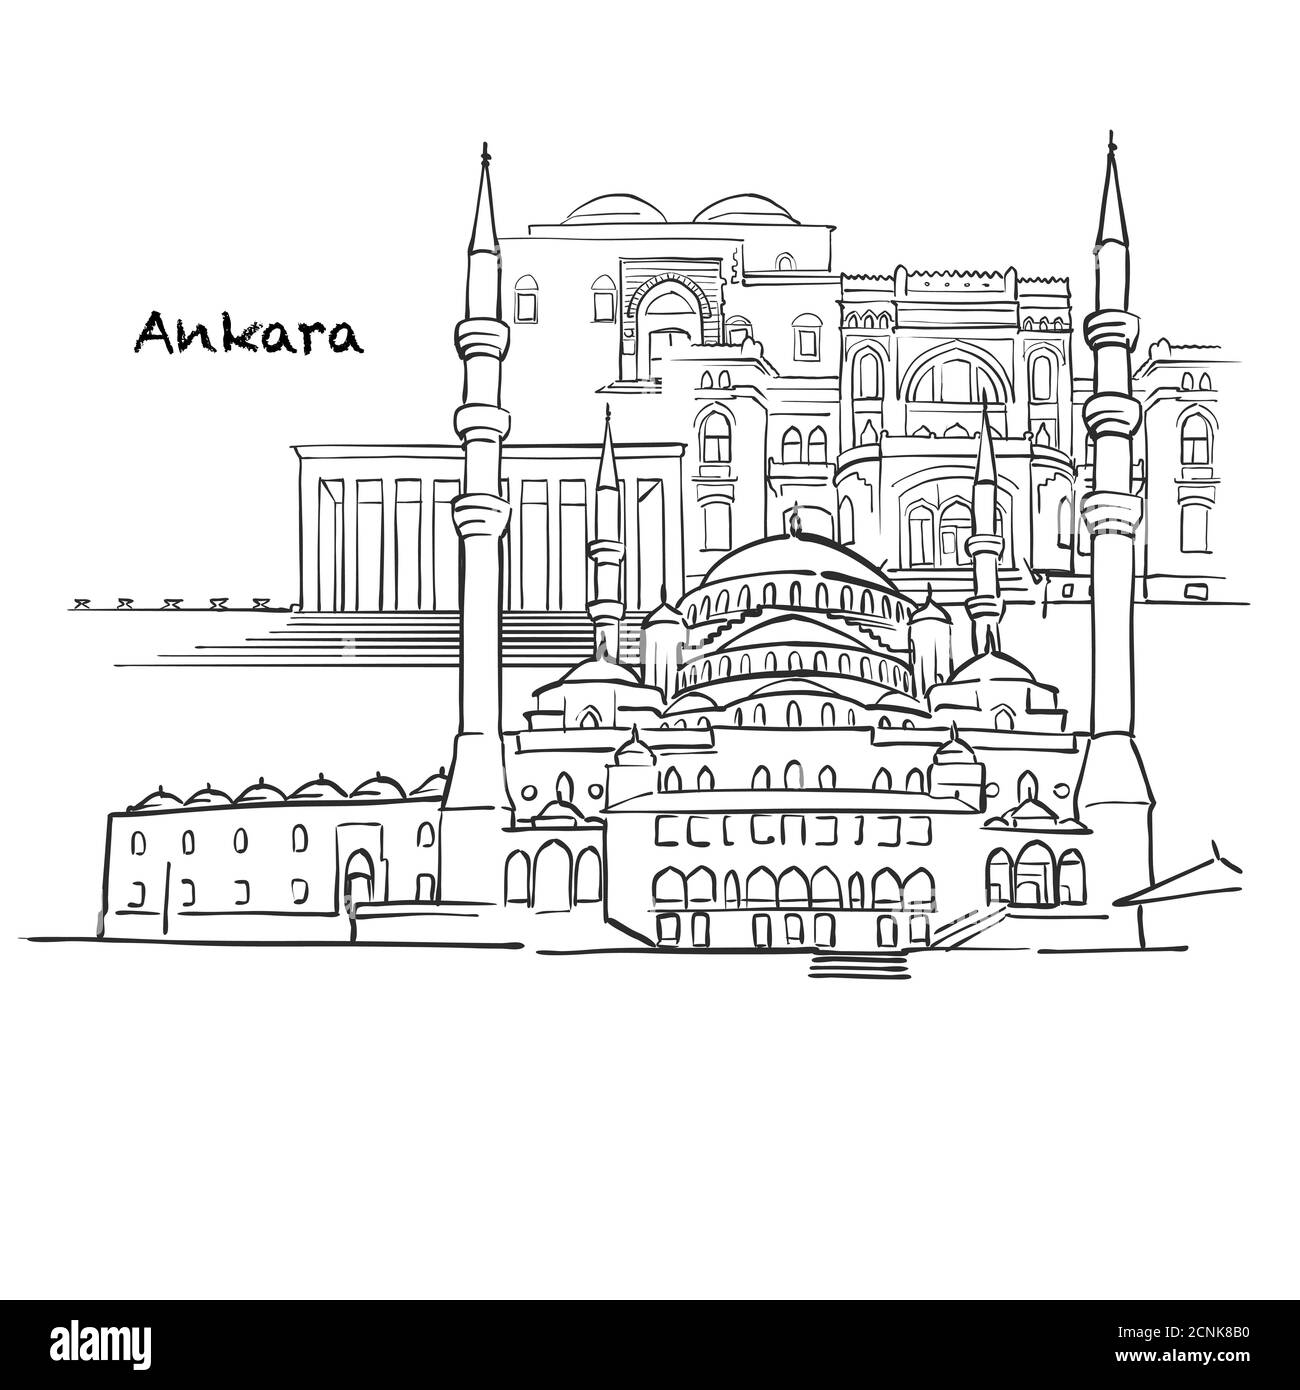 Famous buildings of Ankara, Turk Composition. Hand-drawn black and white vector illustration. Grouped and movable objects. Stock Vector